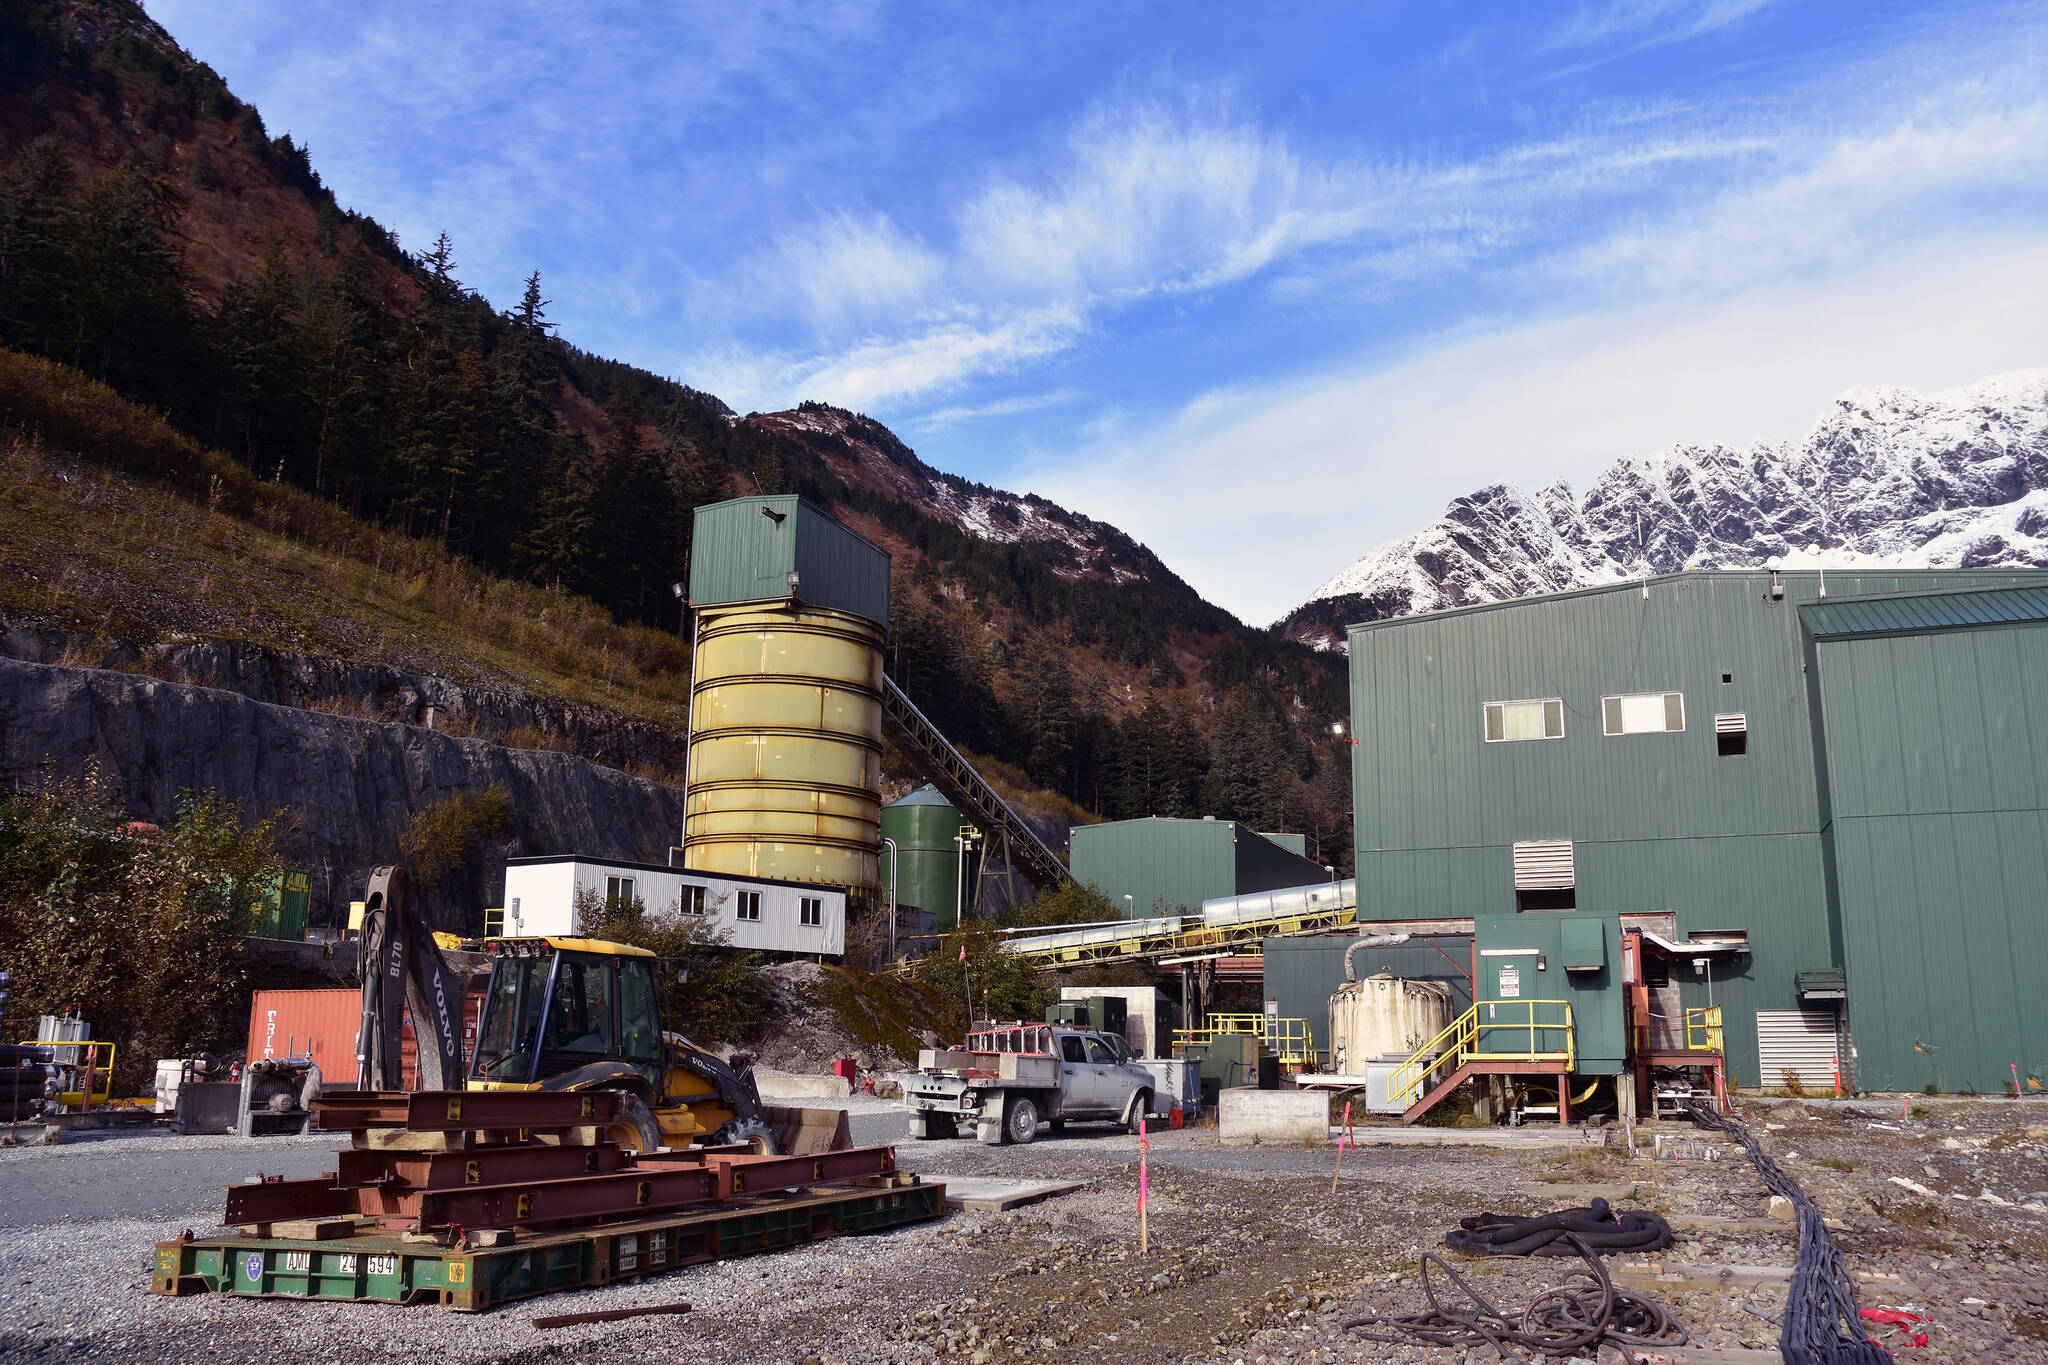 This Empire file photo shows the mill facility at the Kensington Gold Mine on Monday, Oct. 14, 2019. A new study from the Institute of Social and Economic Research at the University of Alaska Anchorage tries to imagine what the state's mining industry could look like in 20 years. (Peter Segall | Juneau Empire file)